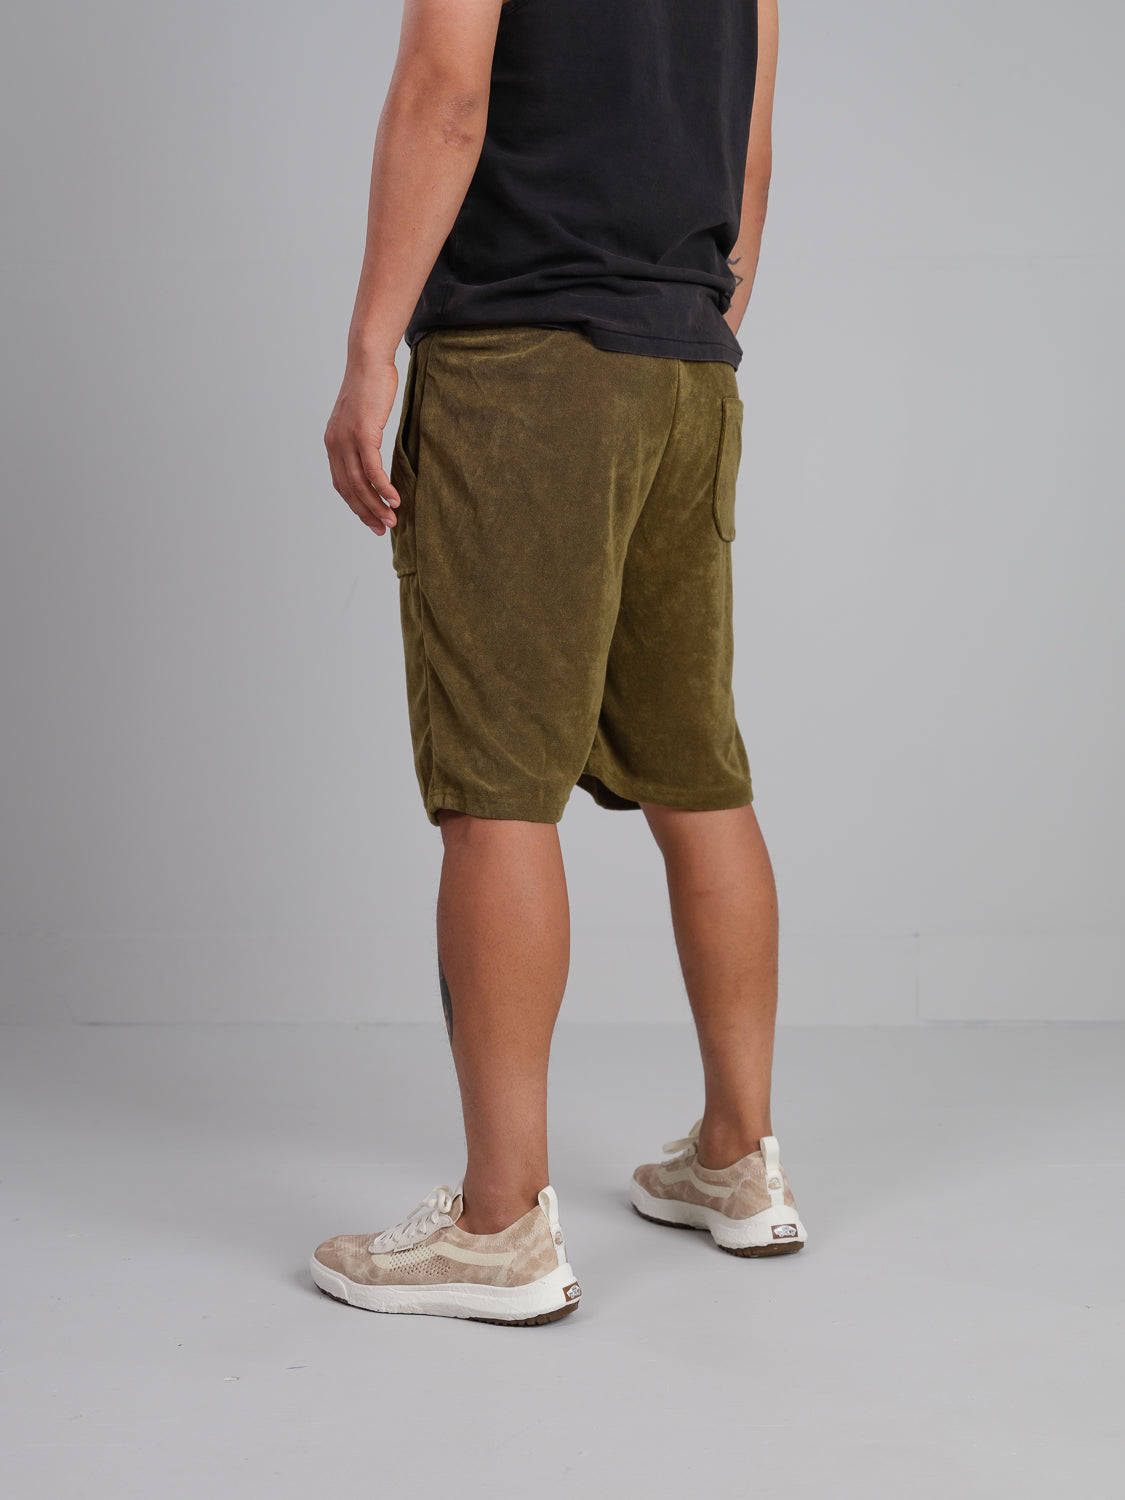 Whistler Easy Fit Bamboo Towel Shorts